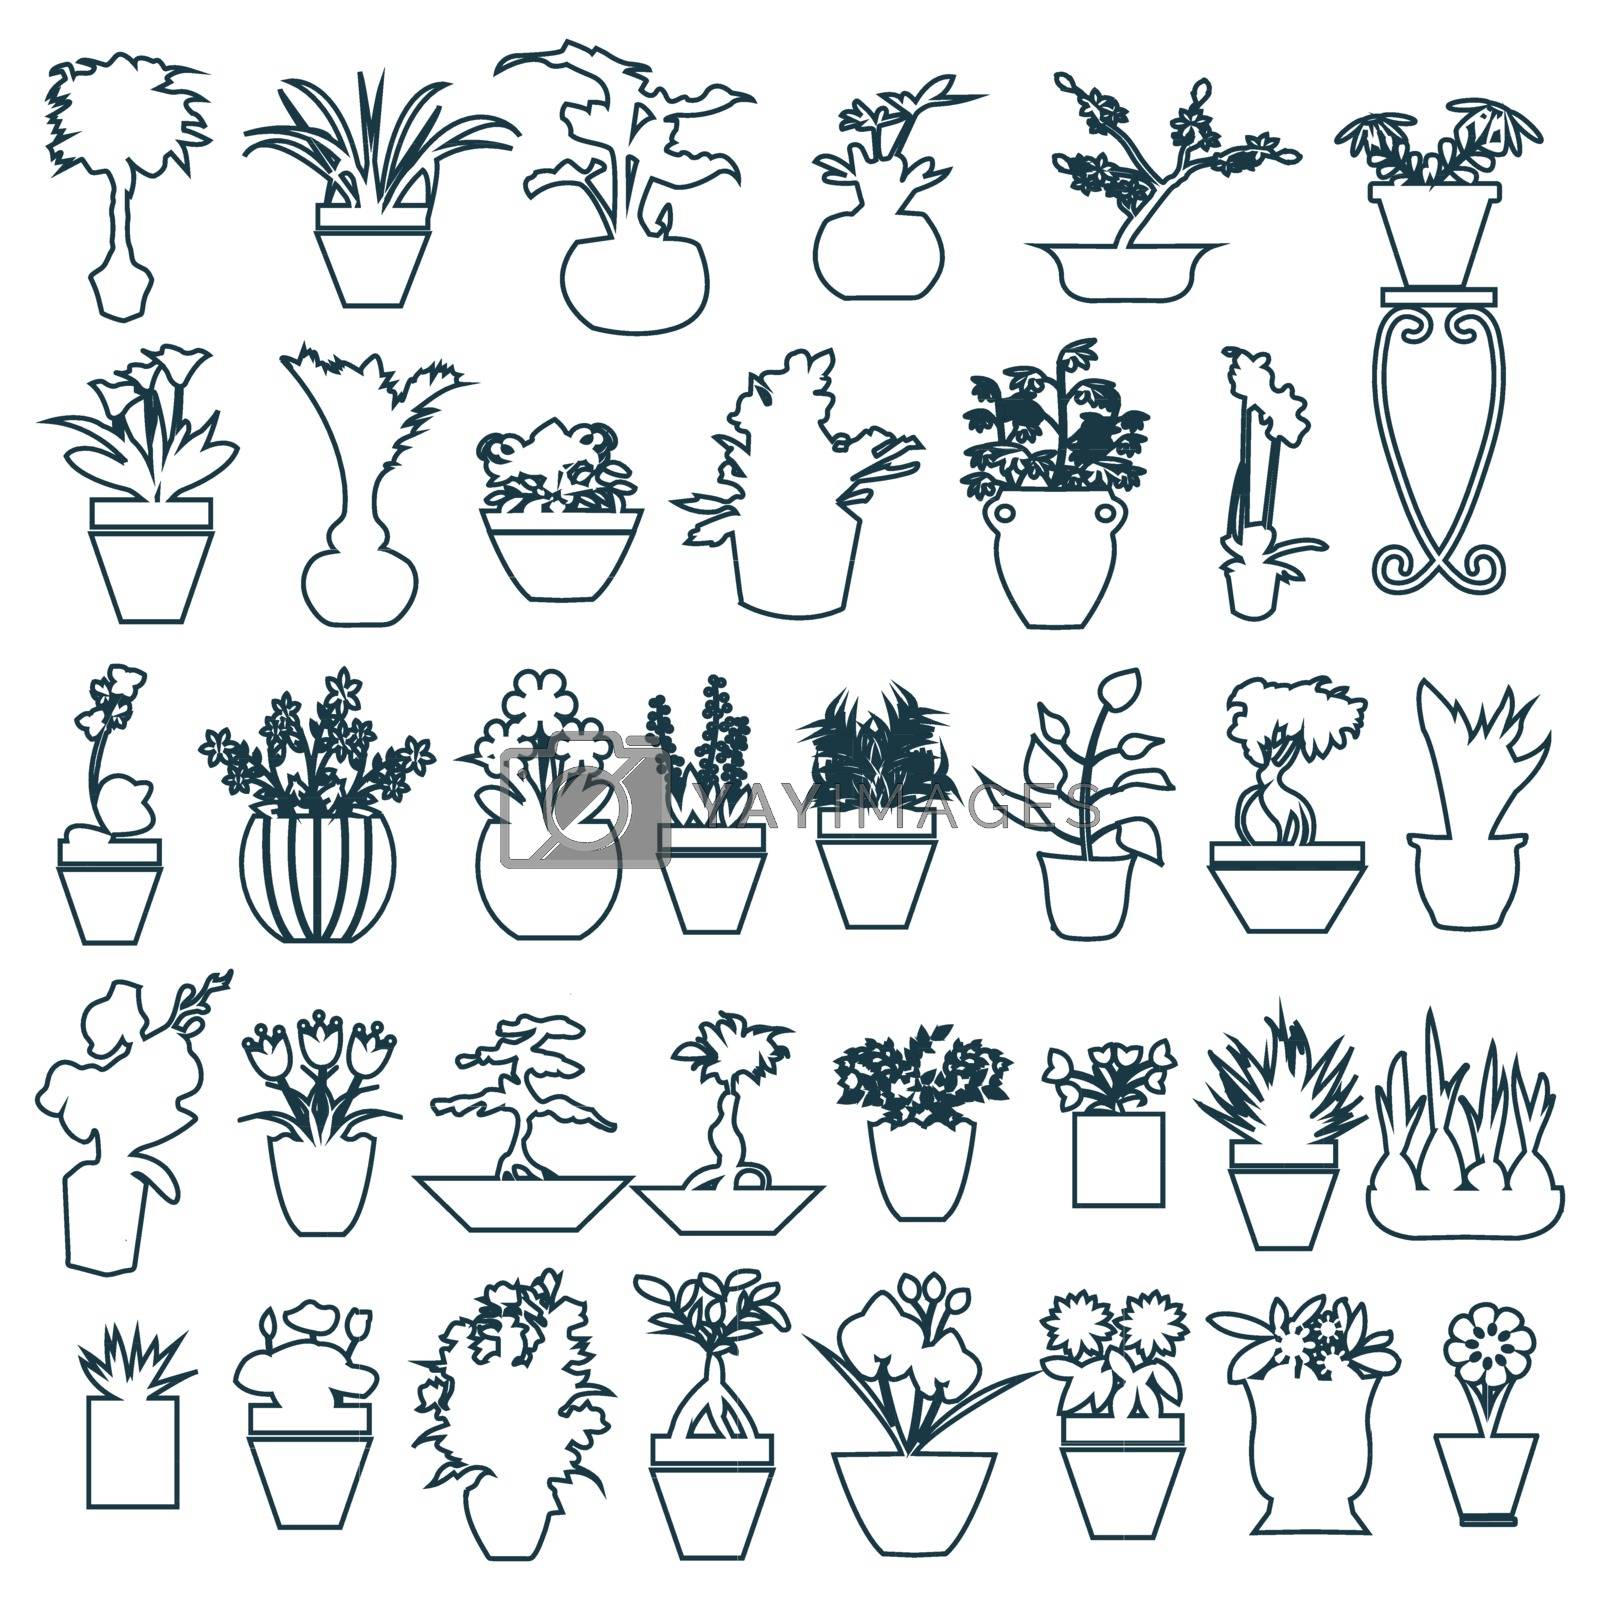 Royalty free image of cute house plants in pots hand-drawing by Margolana